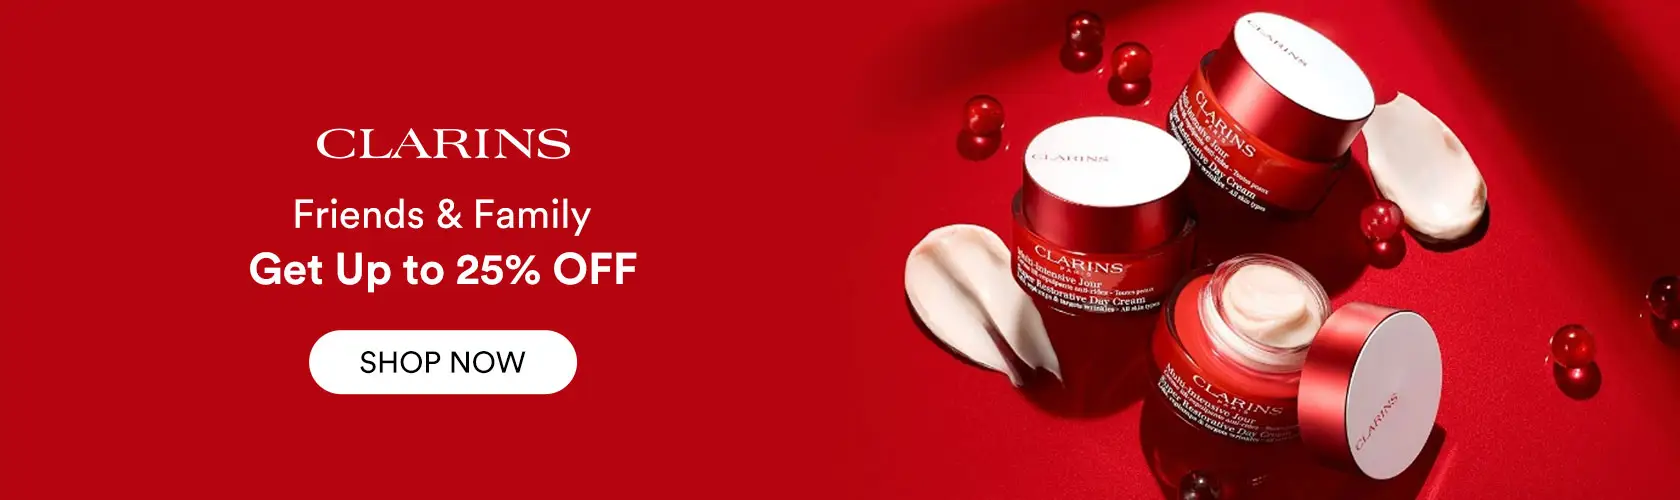 Clarins US: Friends & Family Get Up to 25% OFF